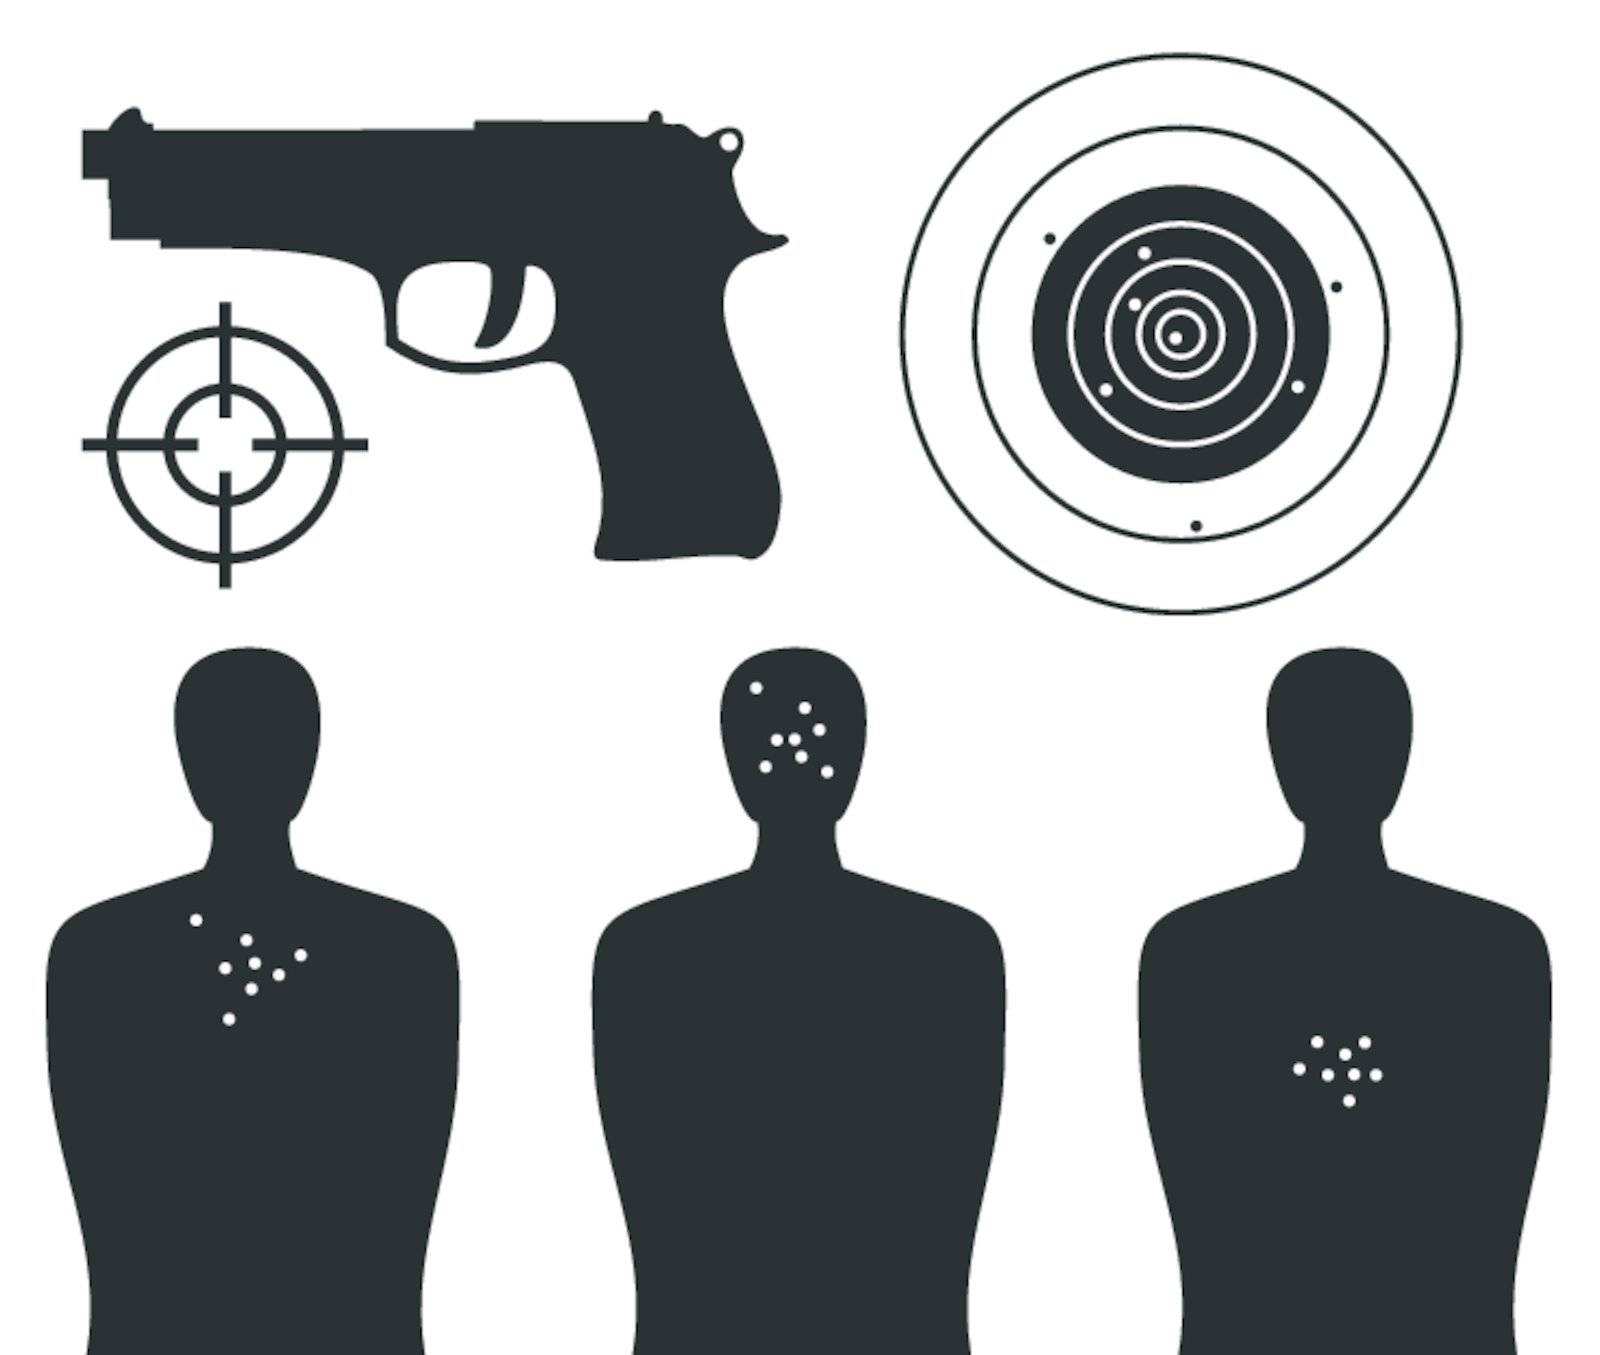 Target of a figure of the person and pistol. A vector illustration